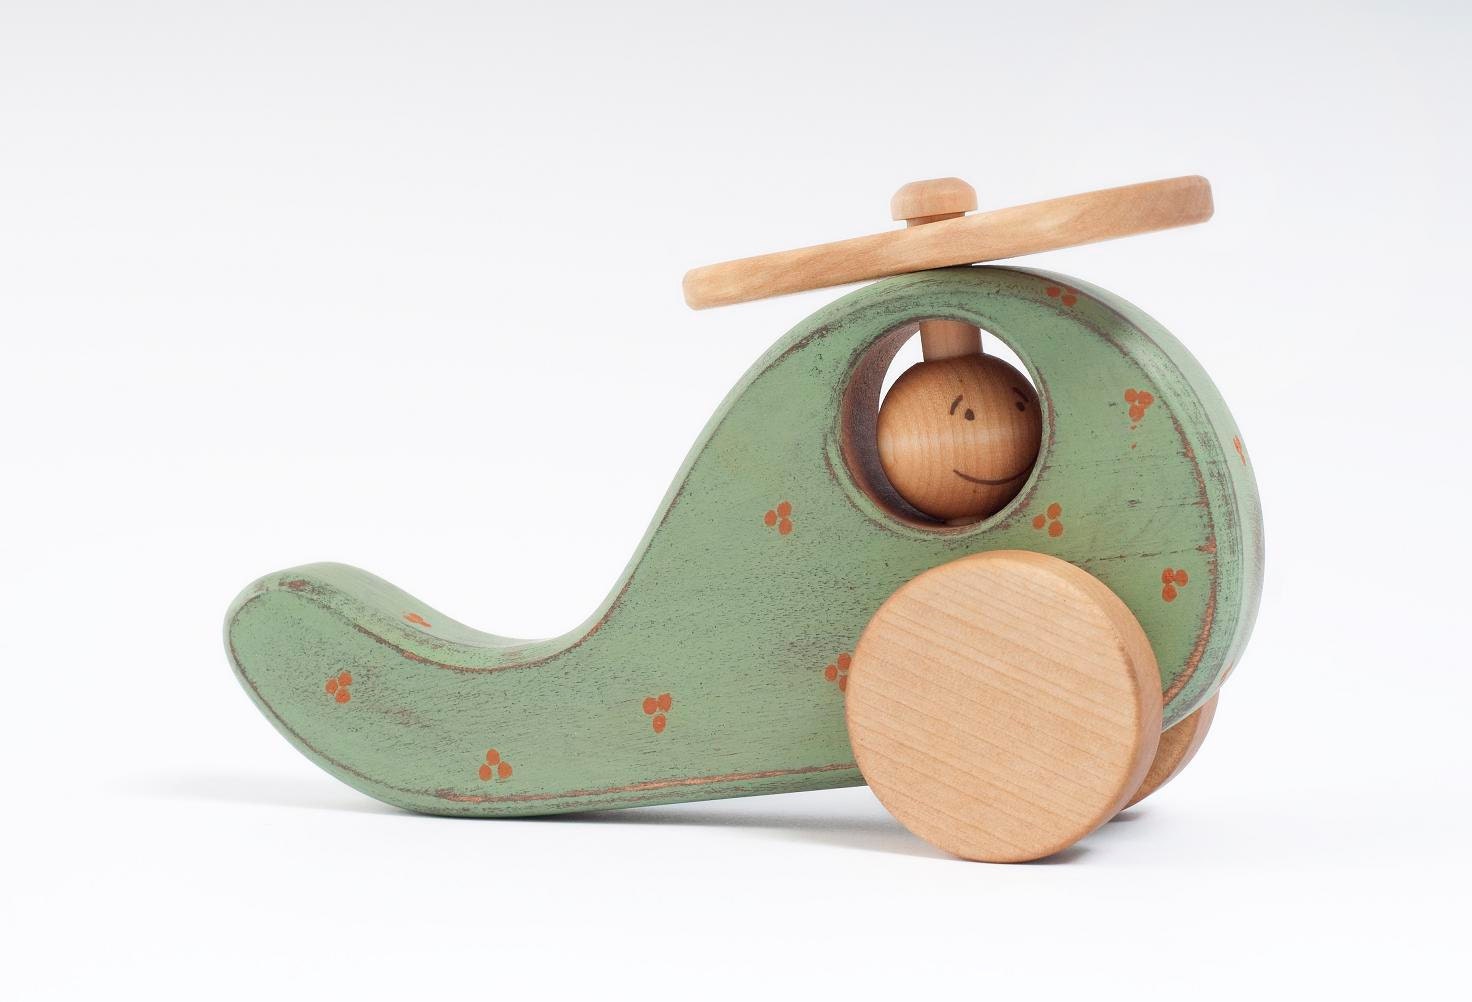 Wooden Toy mint green Helicopter, eco-friendly kid toy - FriendlyToys